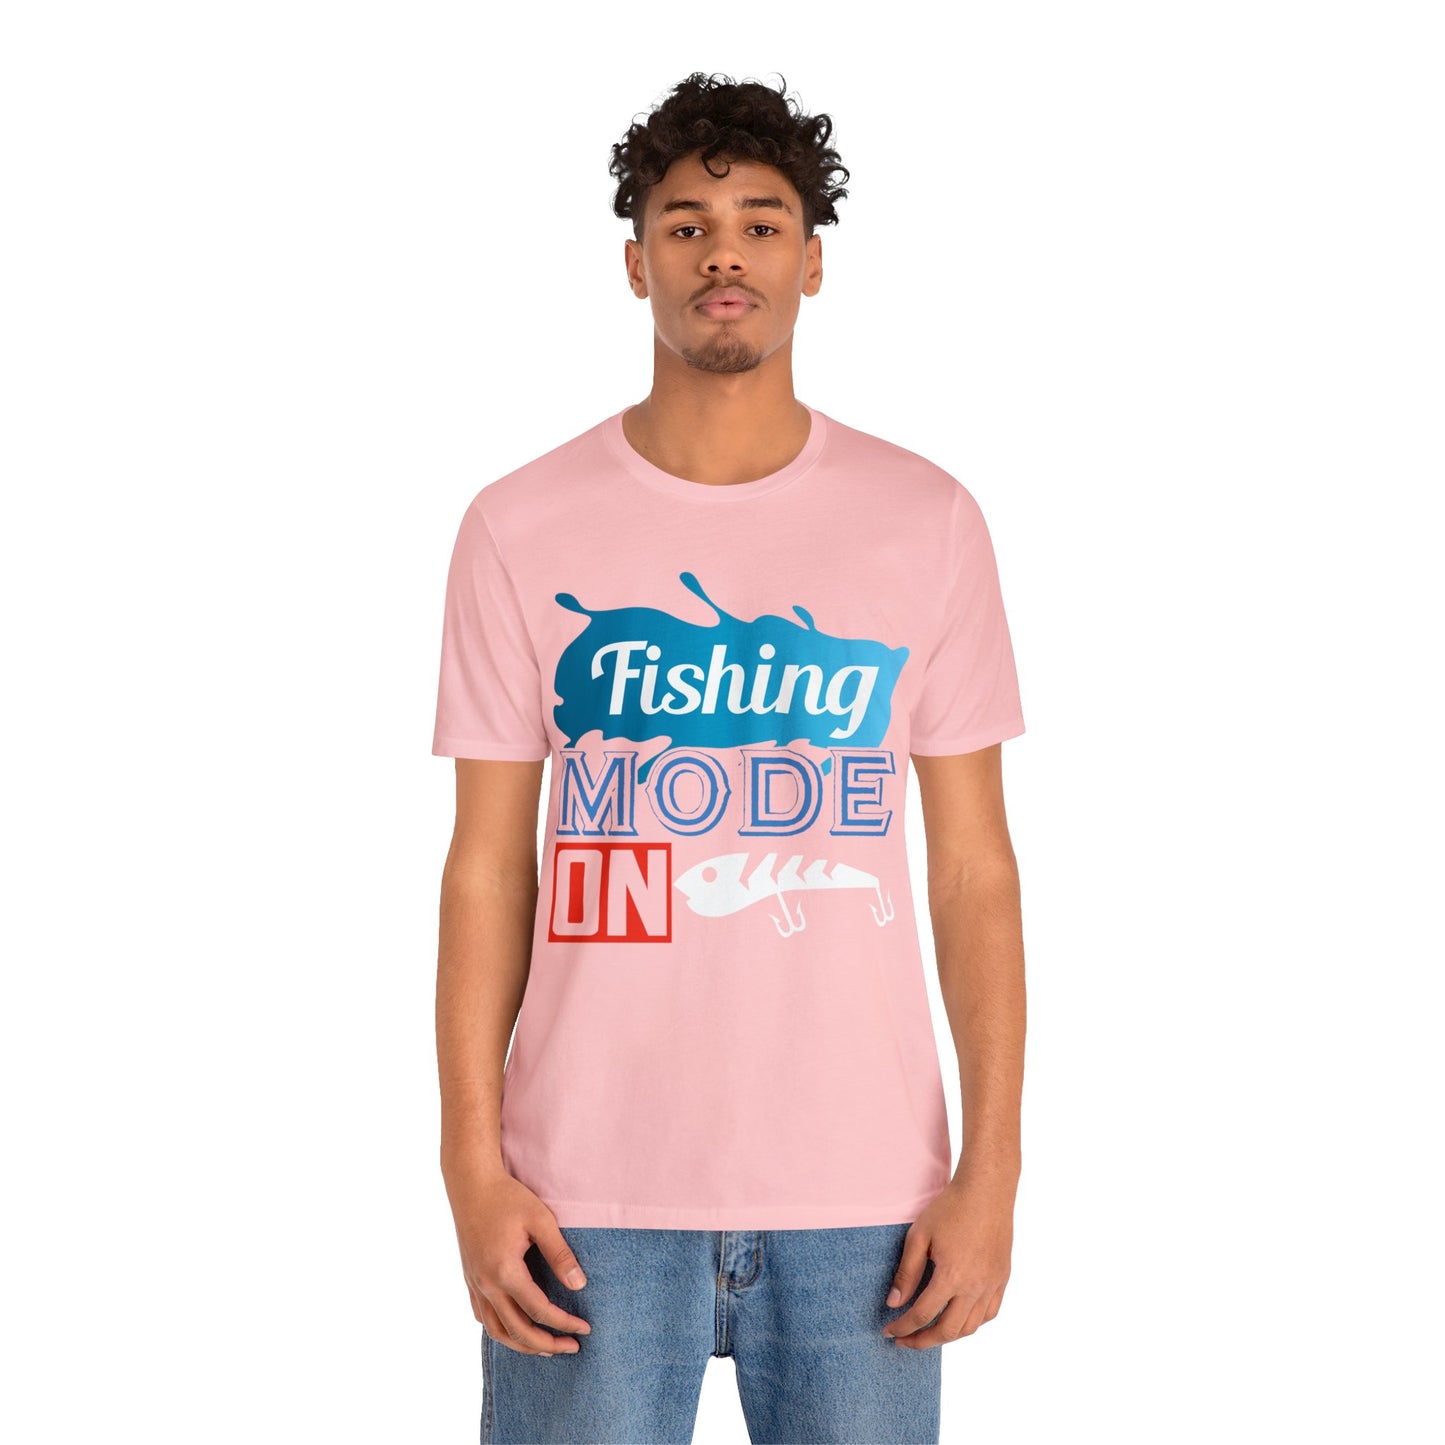 Cast Away in Style with Our Exclusive 'Fishing Mood On' Day Shirts